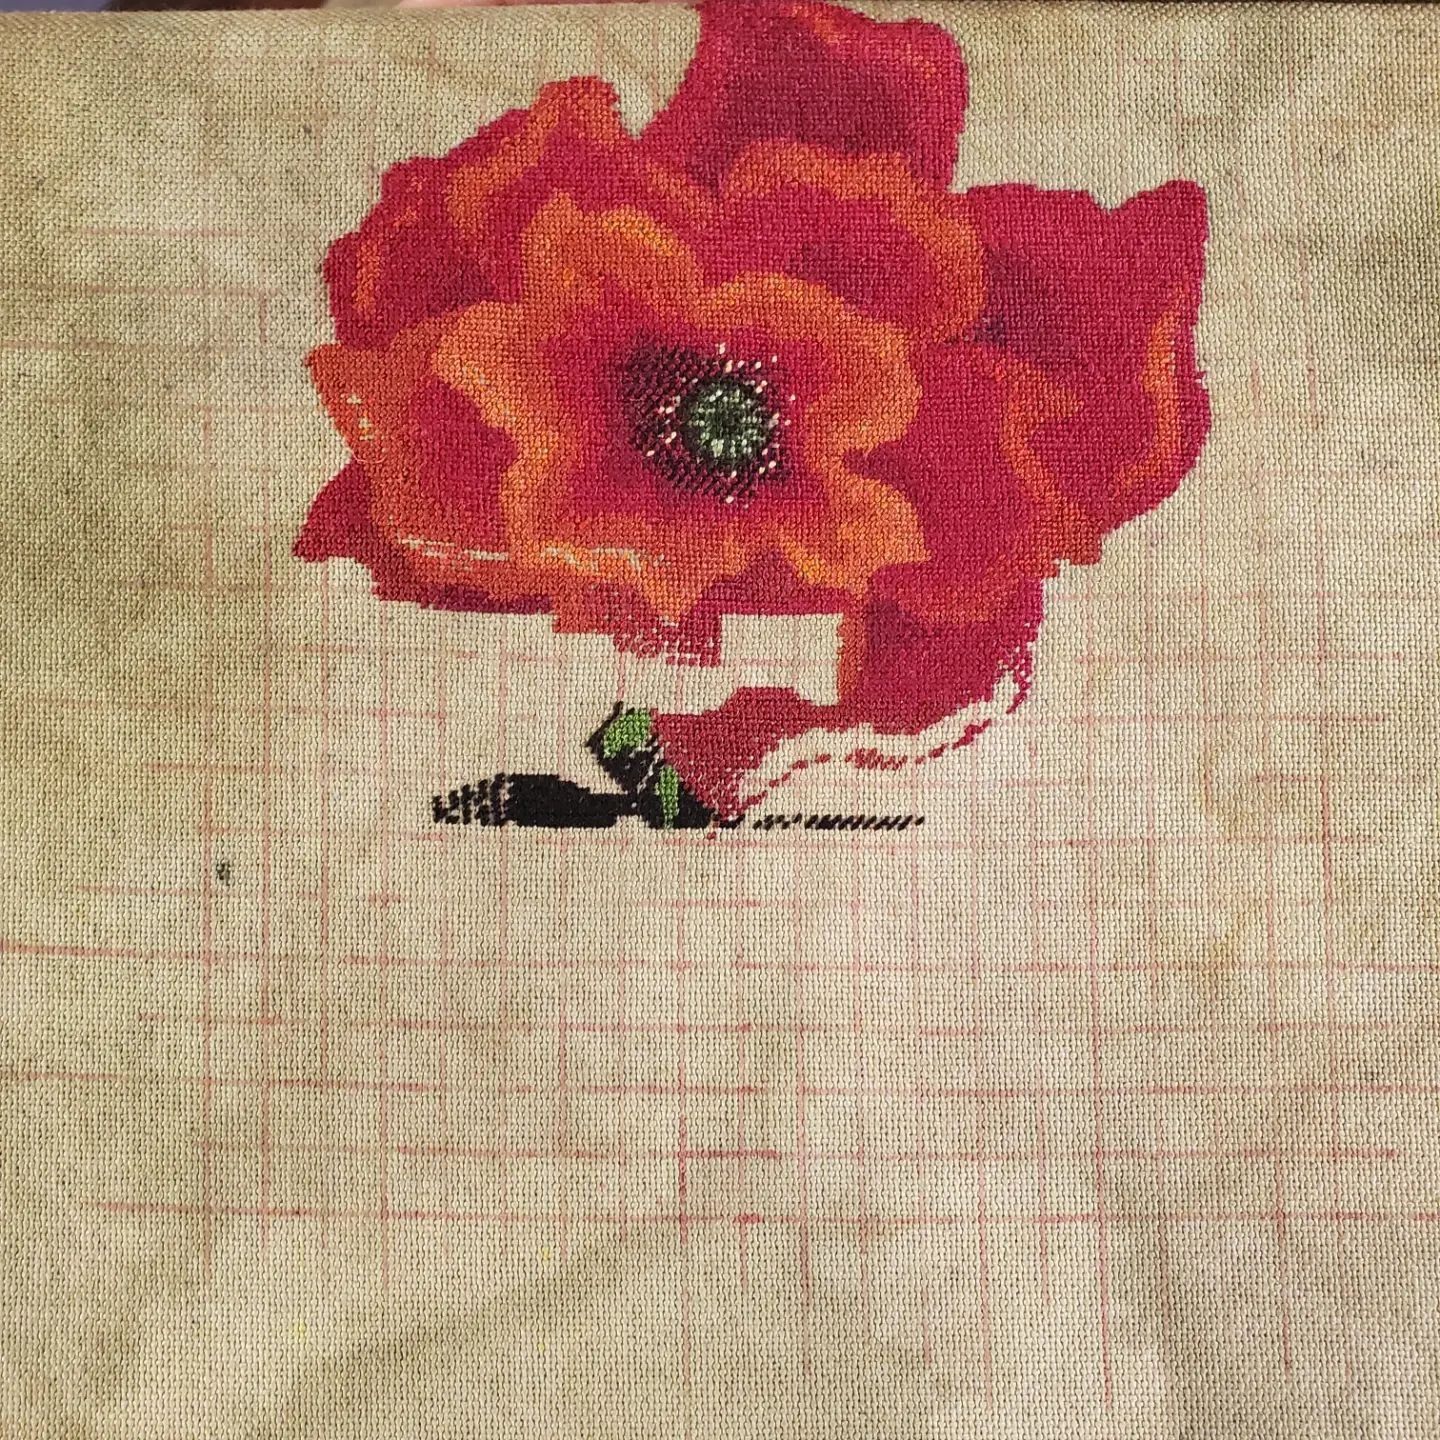 Firat 2000 stitches in on Catalina artwork by Maxine Gadd.

I am TRYING to finish this flower but of course got distracted by the fact i could be working on her hair then getting an eye worked on.
Why is it so hard to stay focuses?

#maxinegaddsmay 
